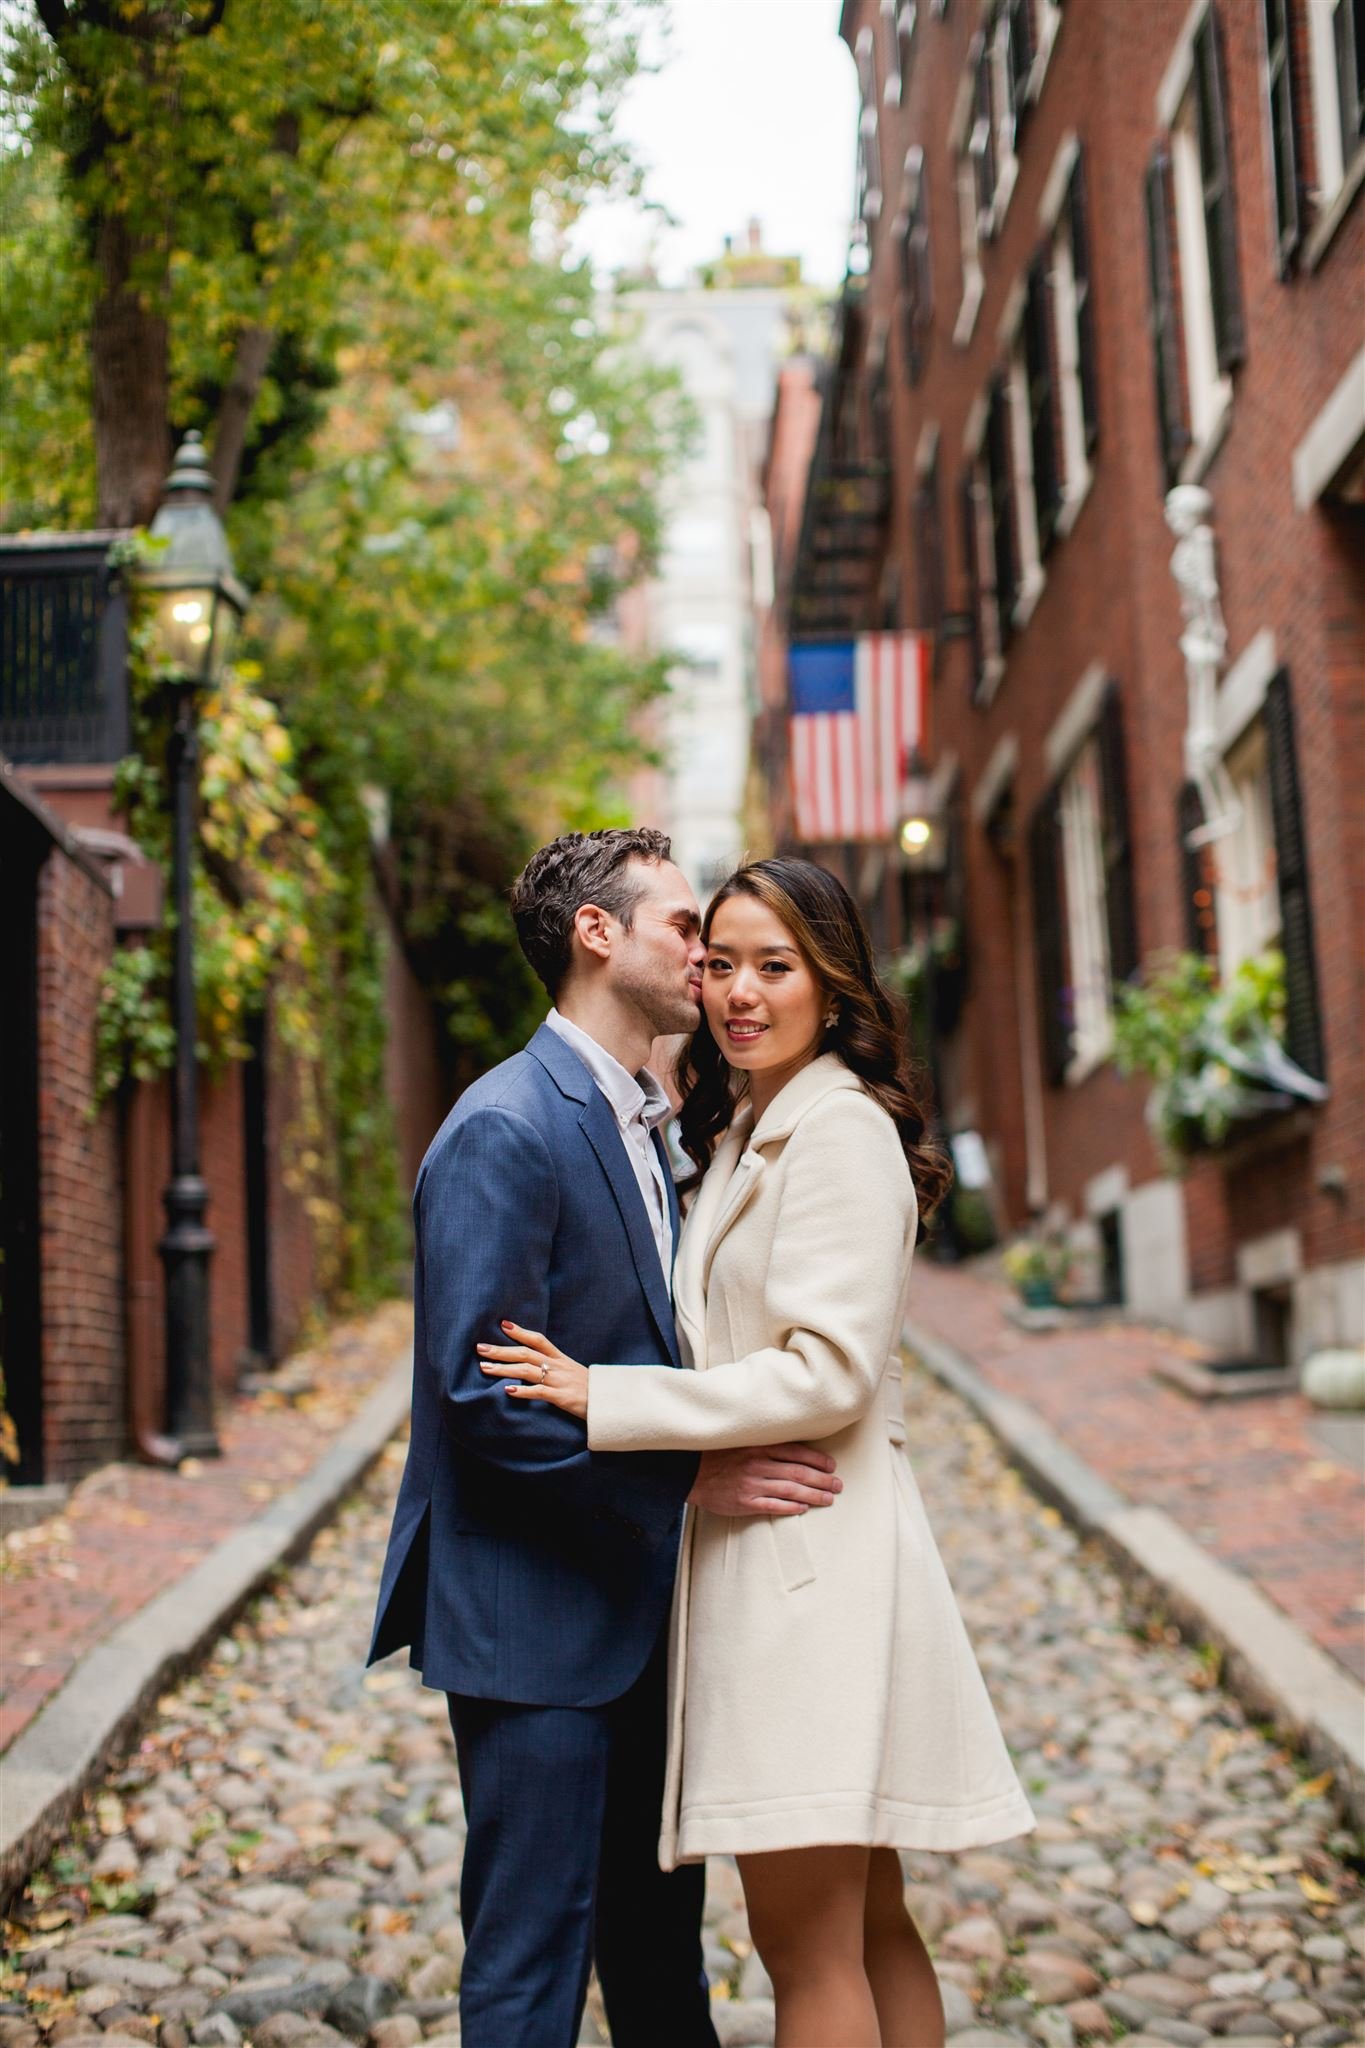 Beacon Hill Engagement Session  Caroline & Max - Annmarie Swift Photography